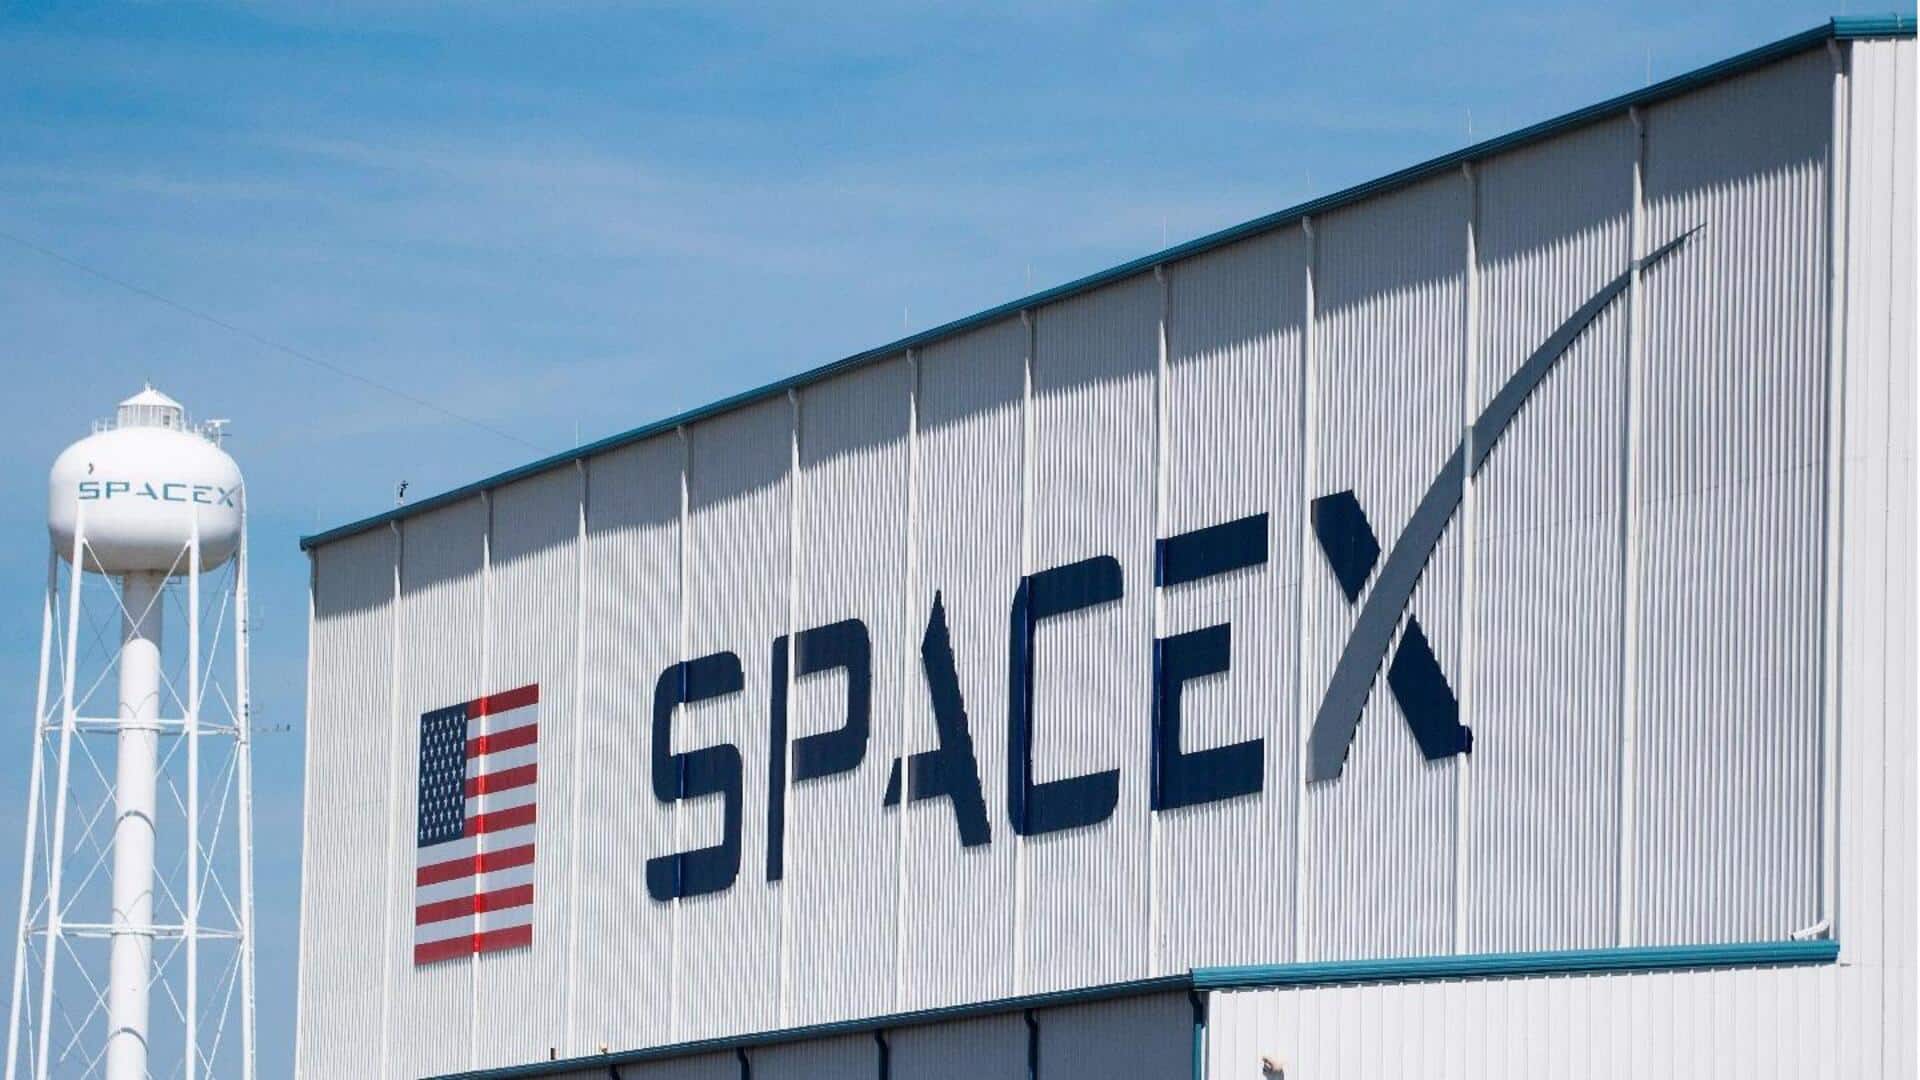 Elon Musk's SpaceX moves incorporation from Delaware to Texas